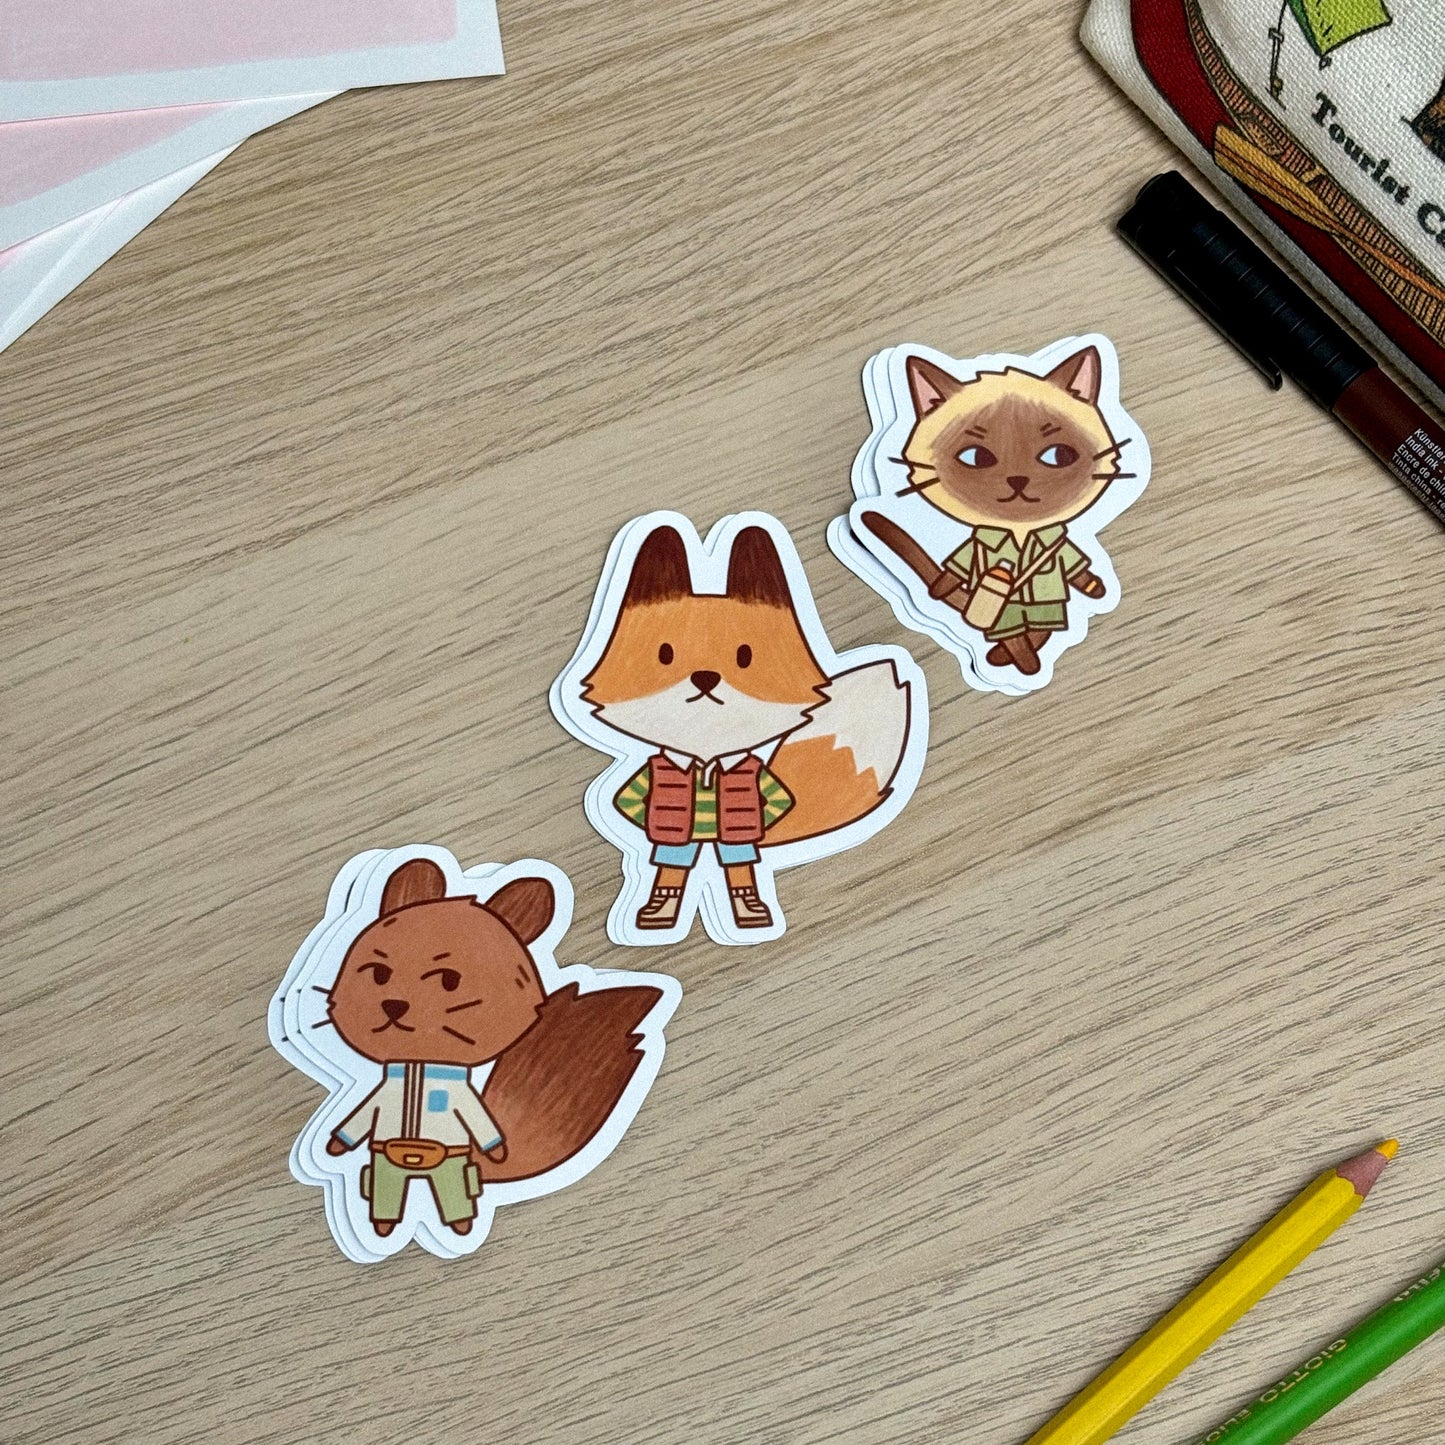 Adventure Friends Pack of 3 Stickers